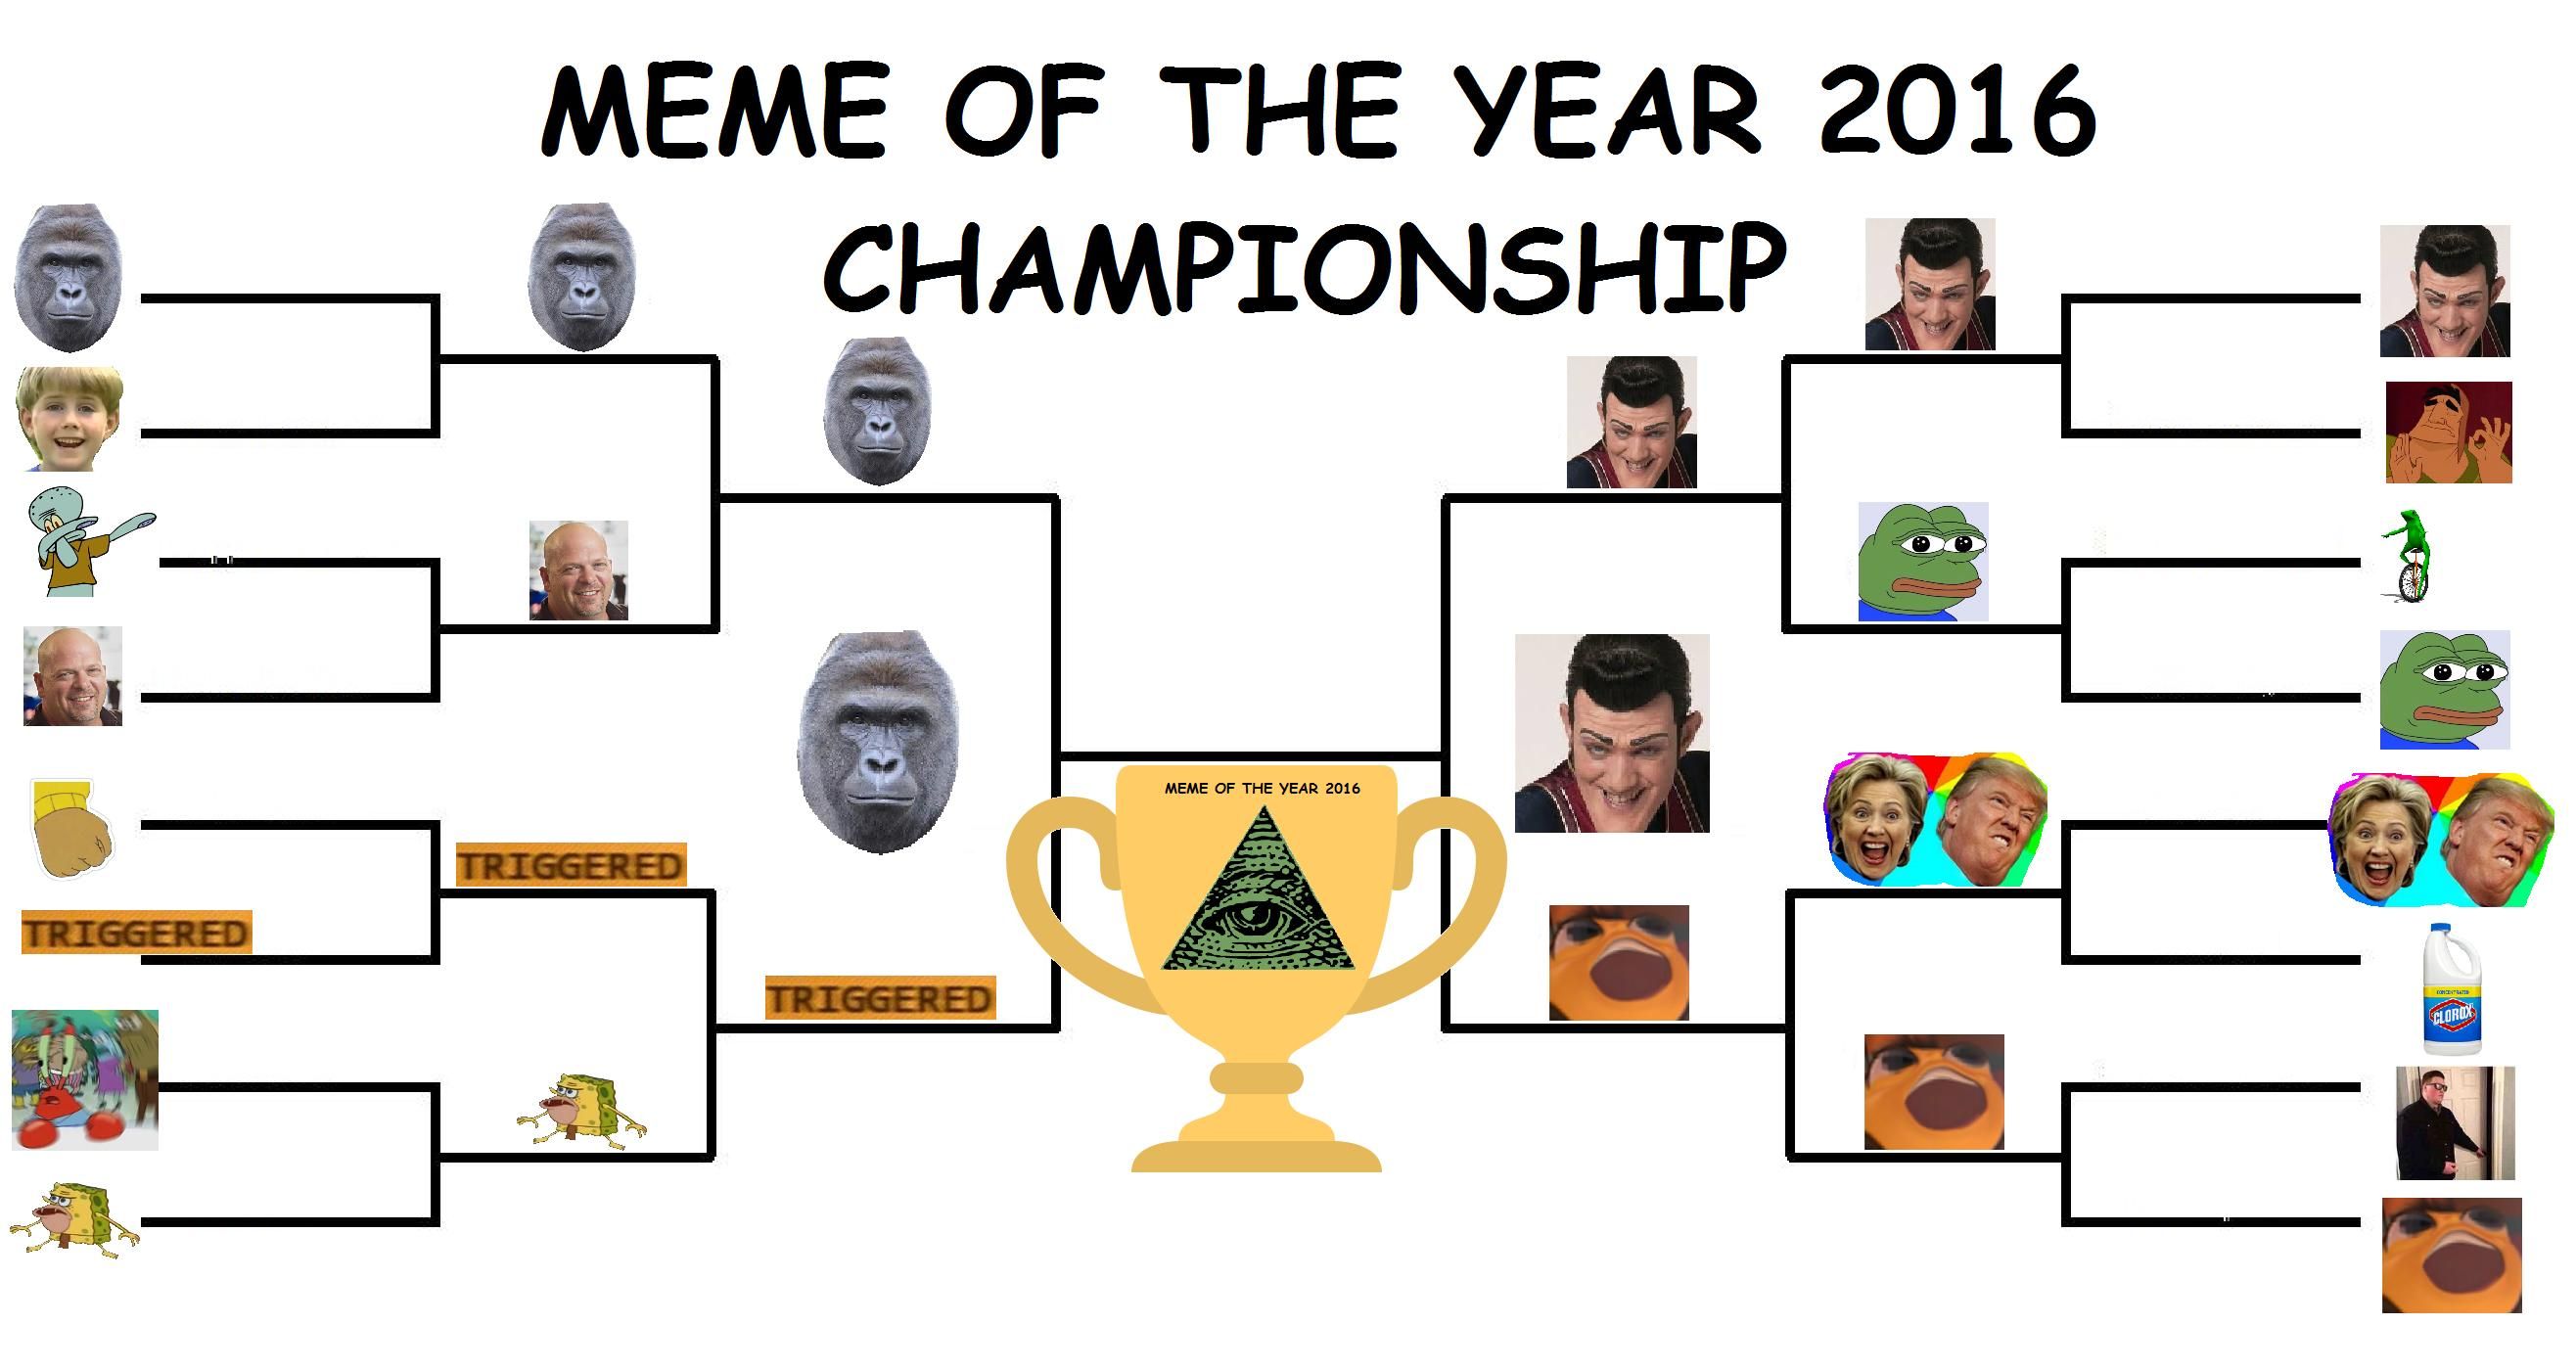 Comment who should win this years "meme games"